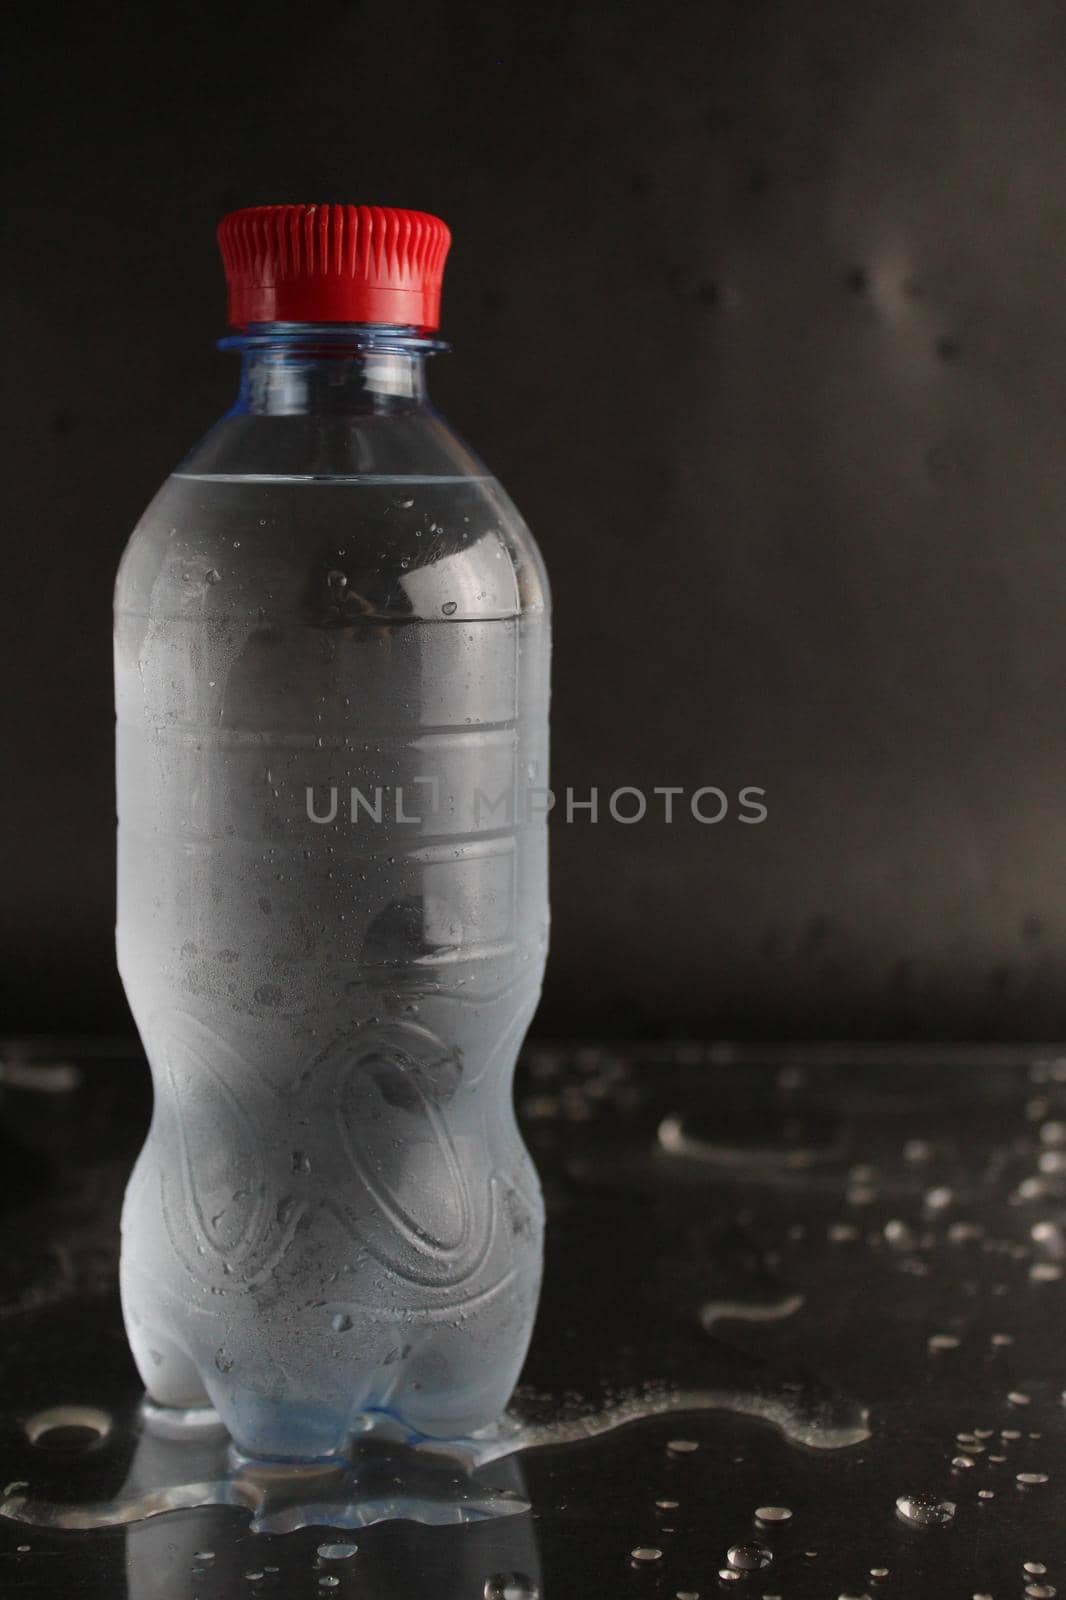 Cold water in a bottle on a black background. A bottle of water stands on a black background. Cool summer drinks.